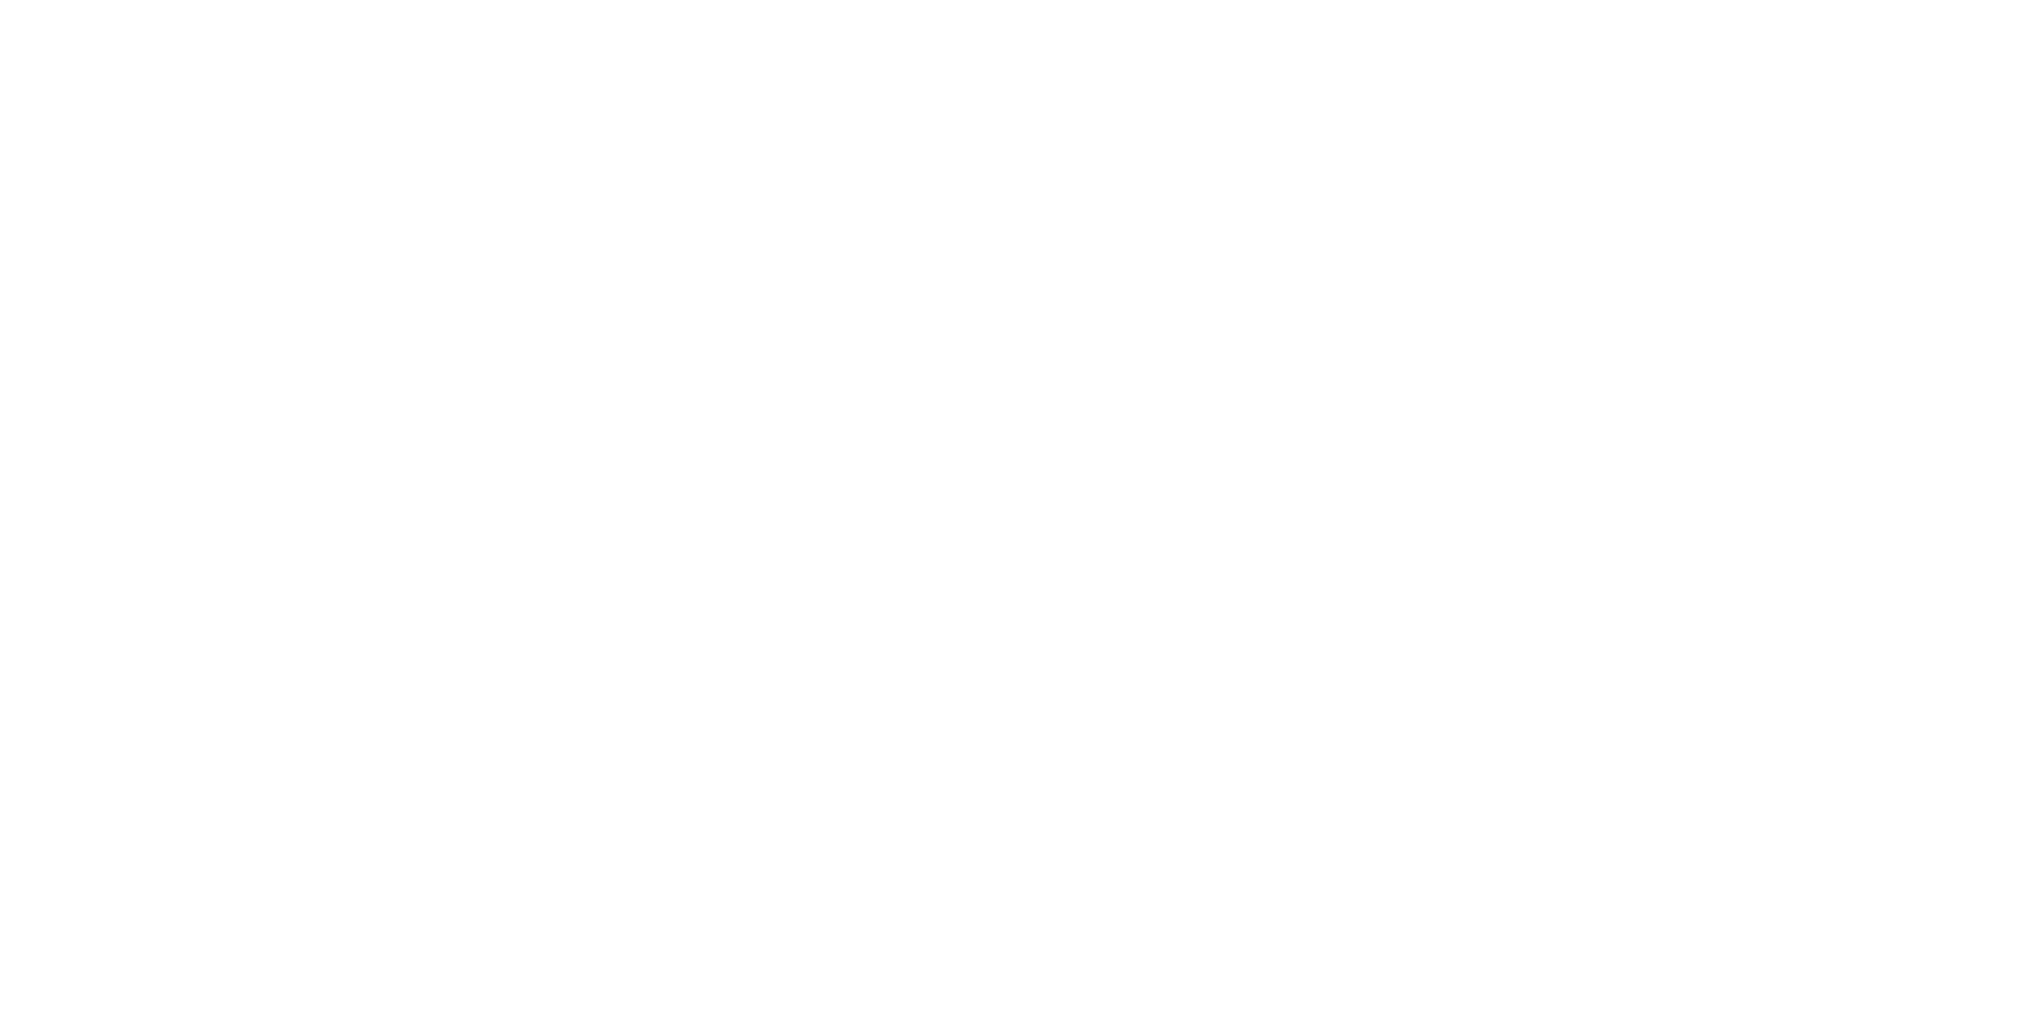 https://a.storyblok.com/f/180781/2362x1182/1c3d5fd432/white_responsible-icons-pass-it-forward.png